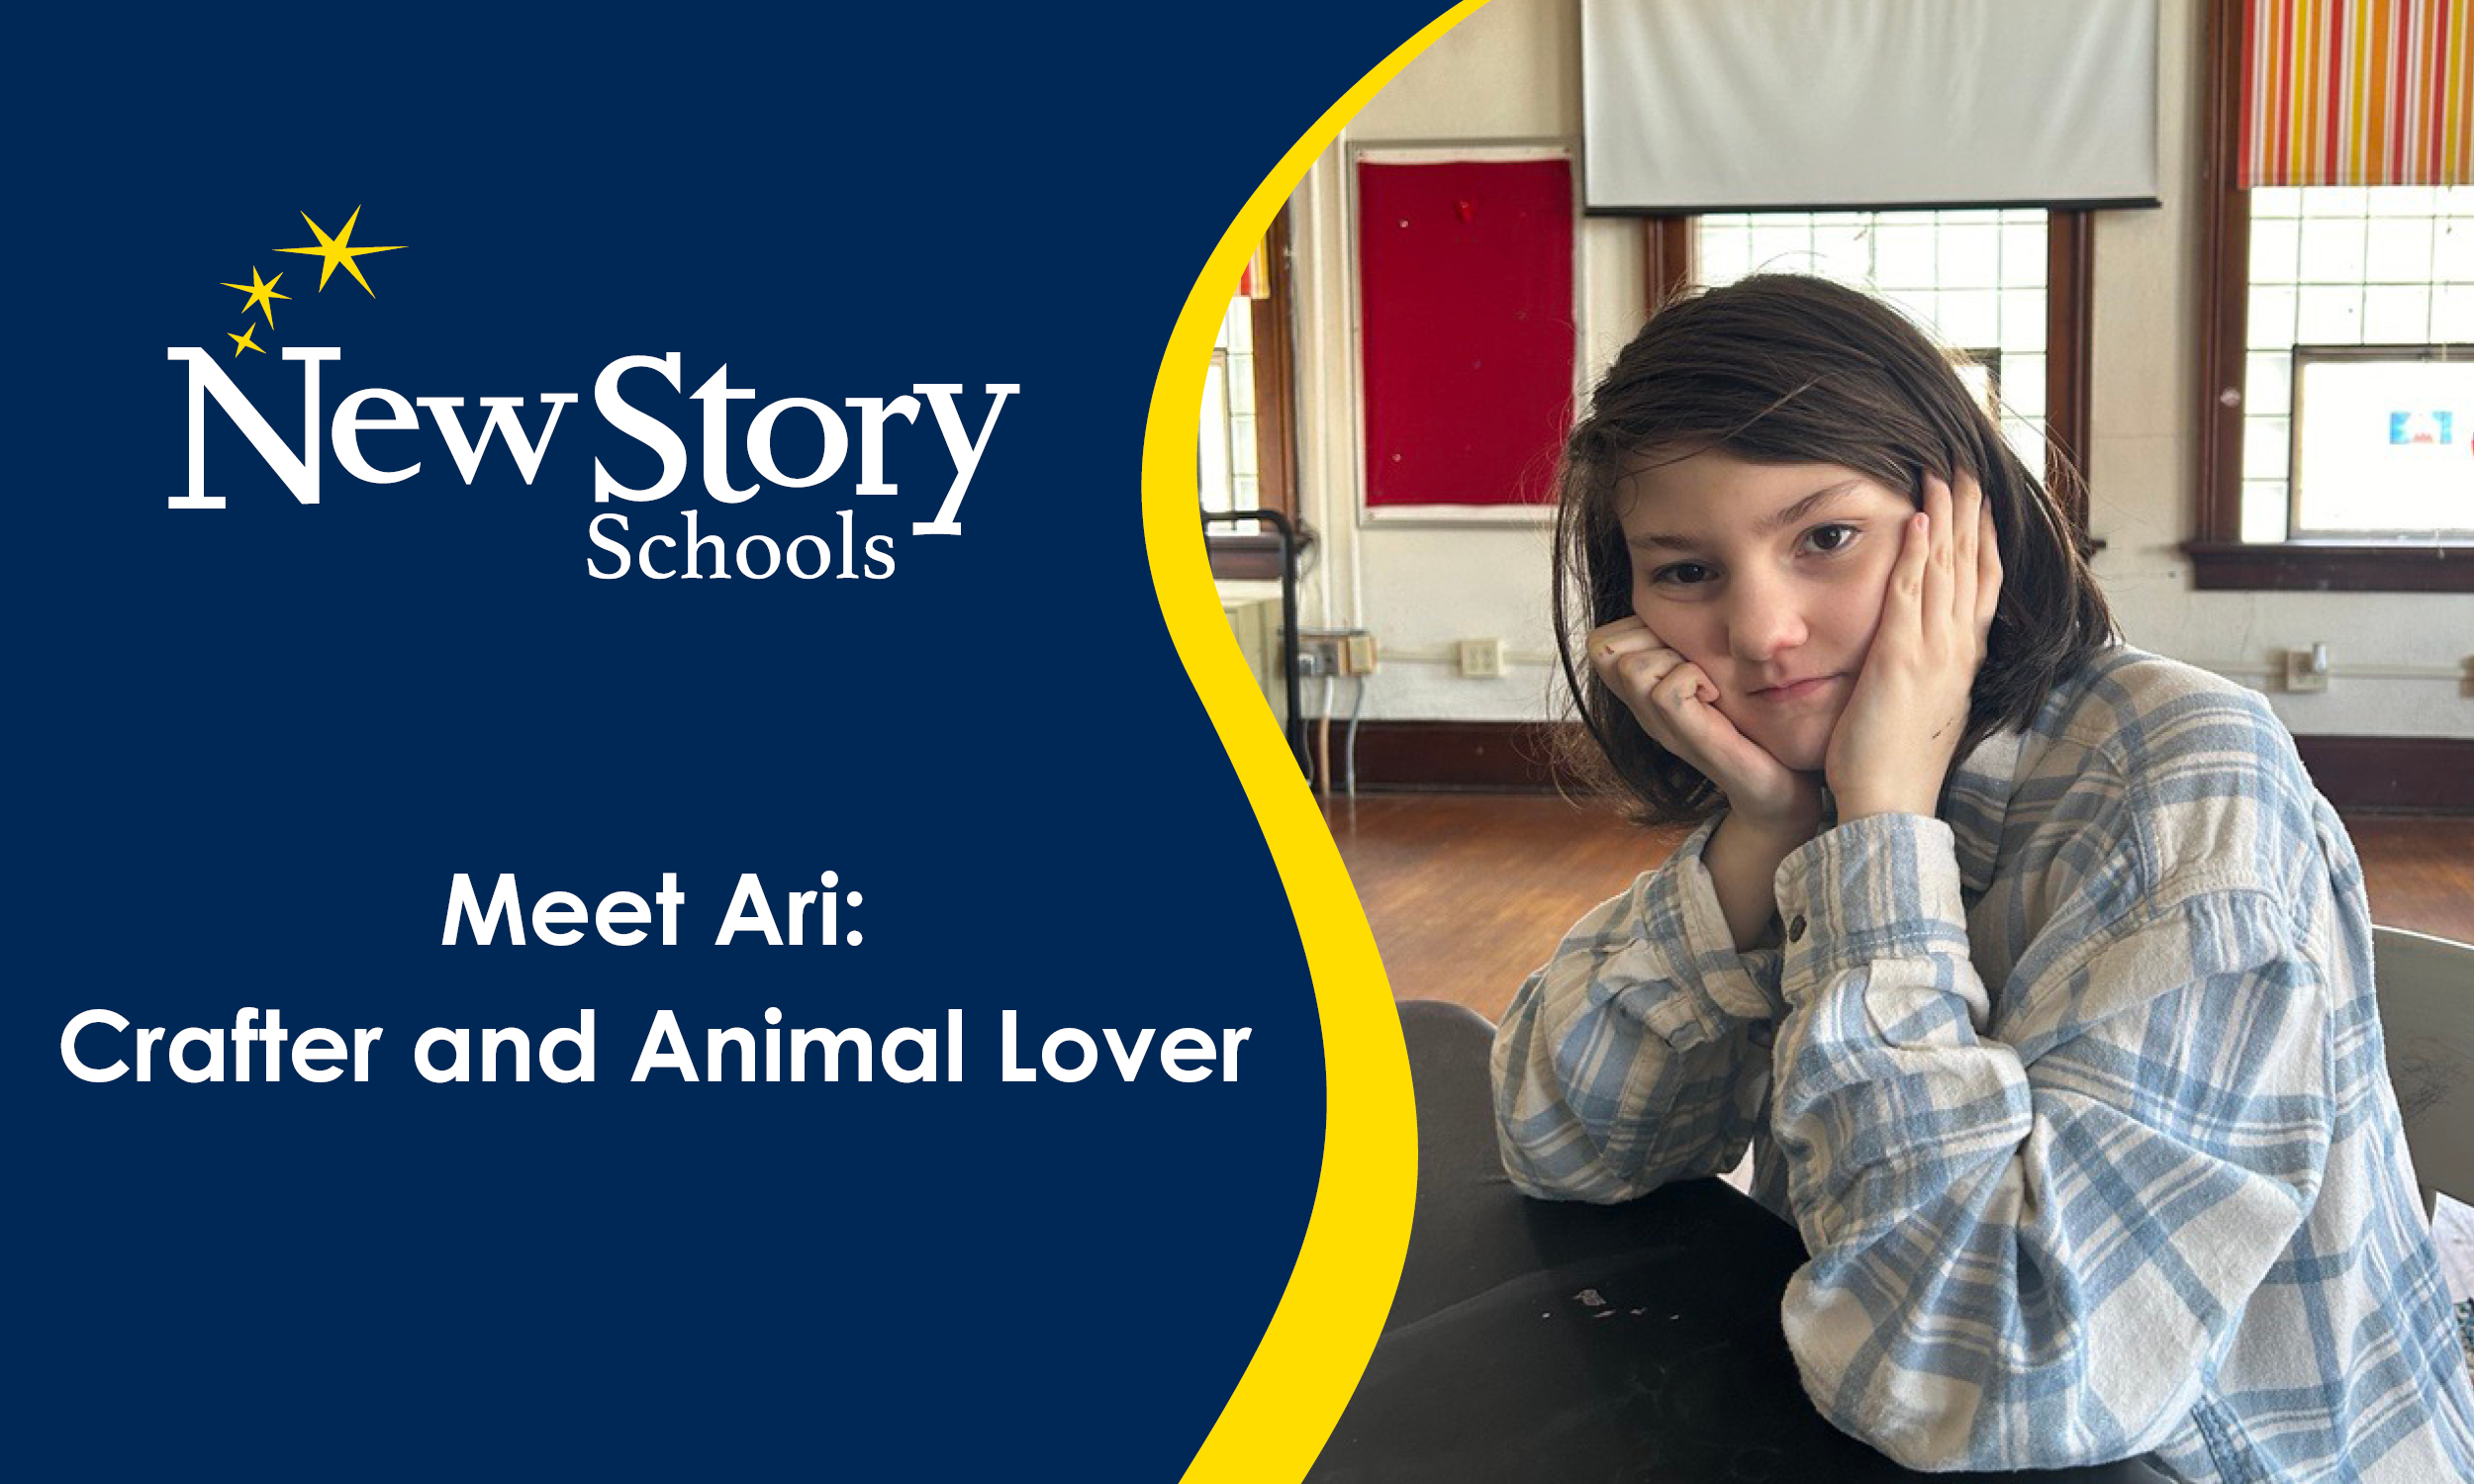 Meet Ari: Crafter and Animal Lover